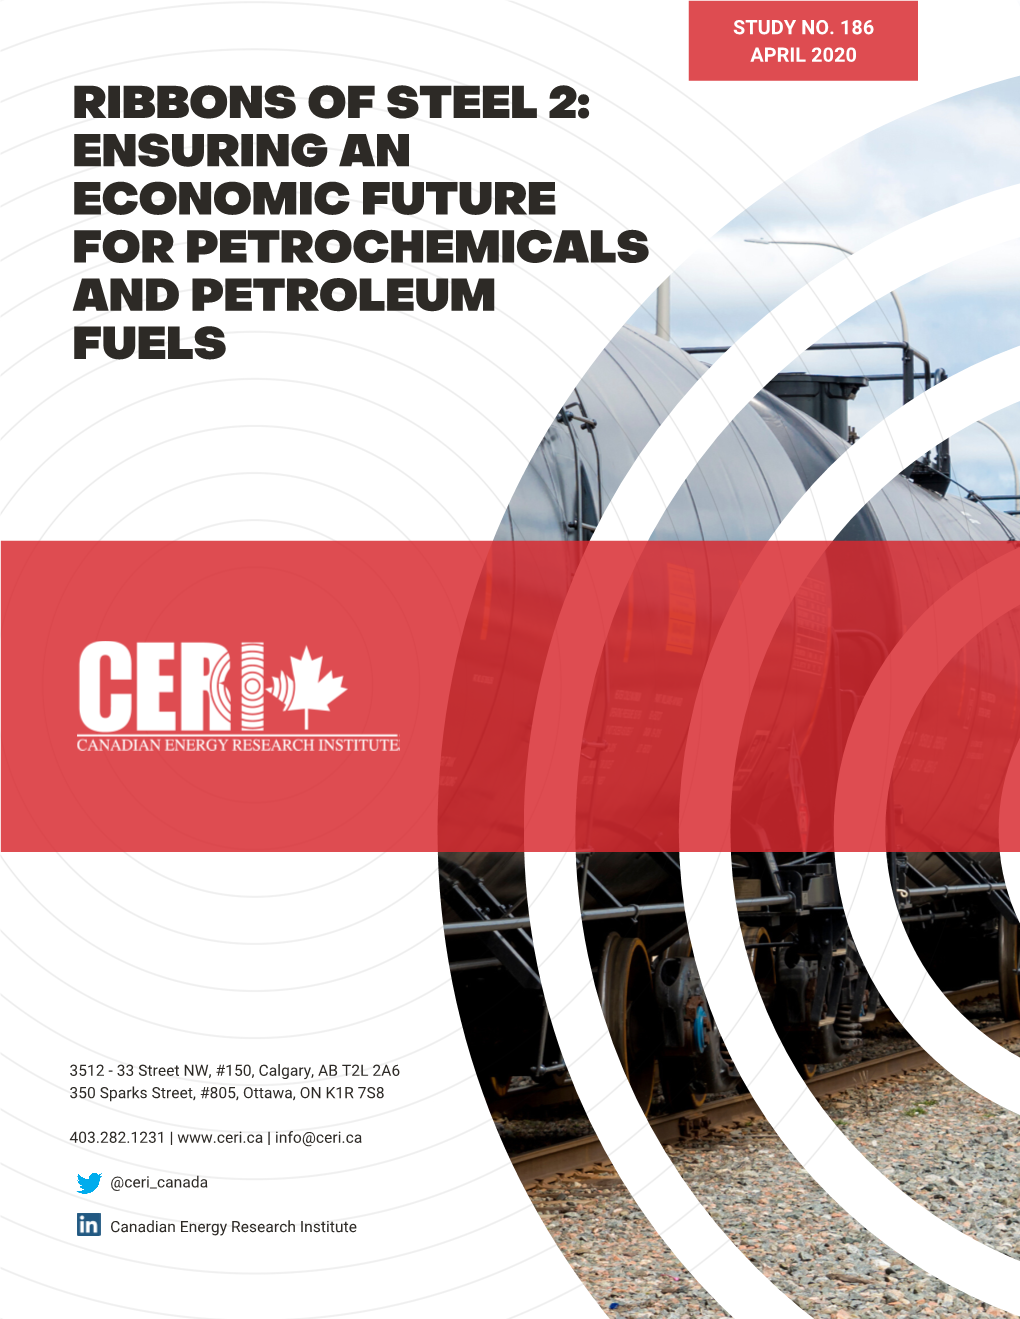 Ensuring an Economic Future for Petrochemicals and Petroleum Fuels